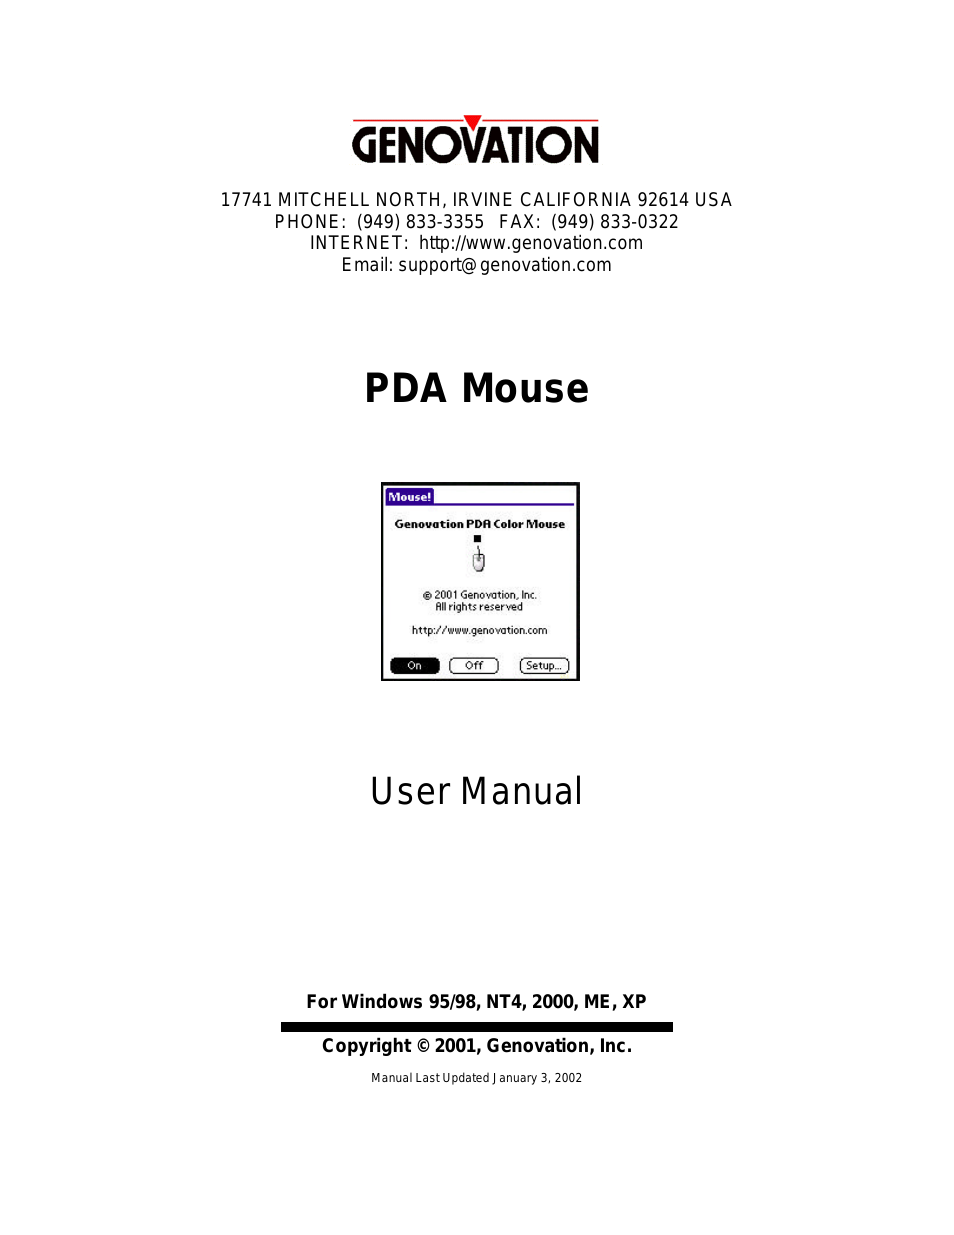 PDA Mouse